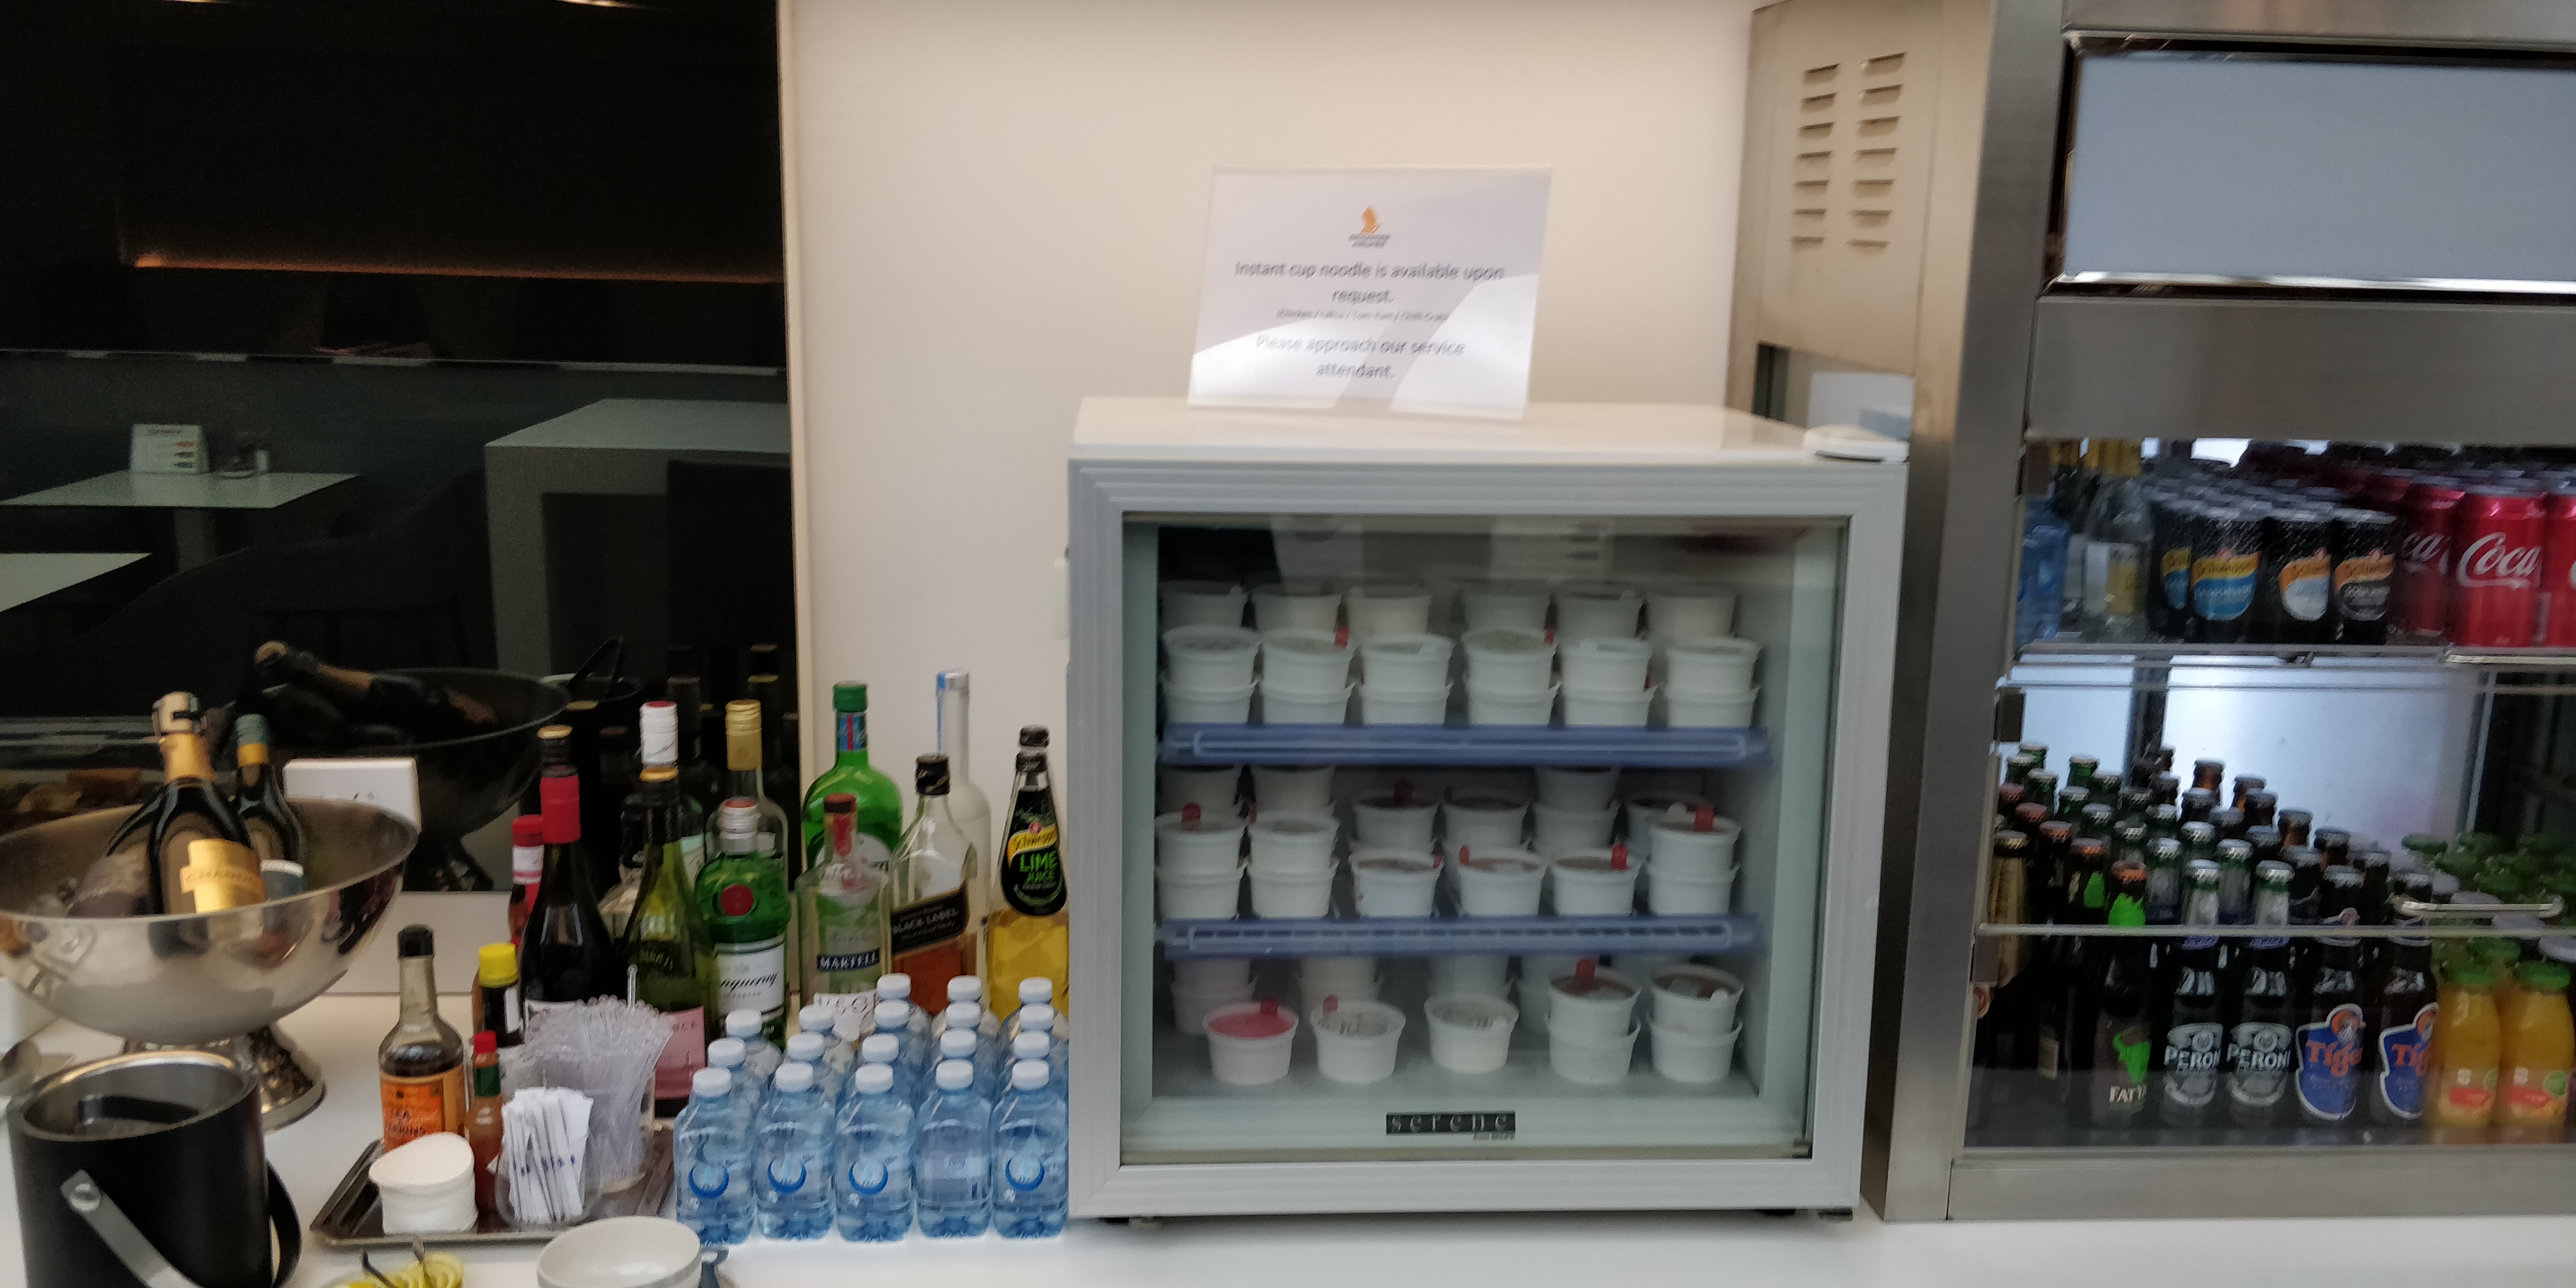 A PICTURE OF THE SILVERKRIS MELBOURNE DRINKS SELECTION